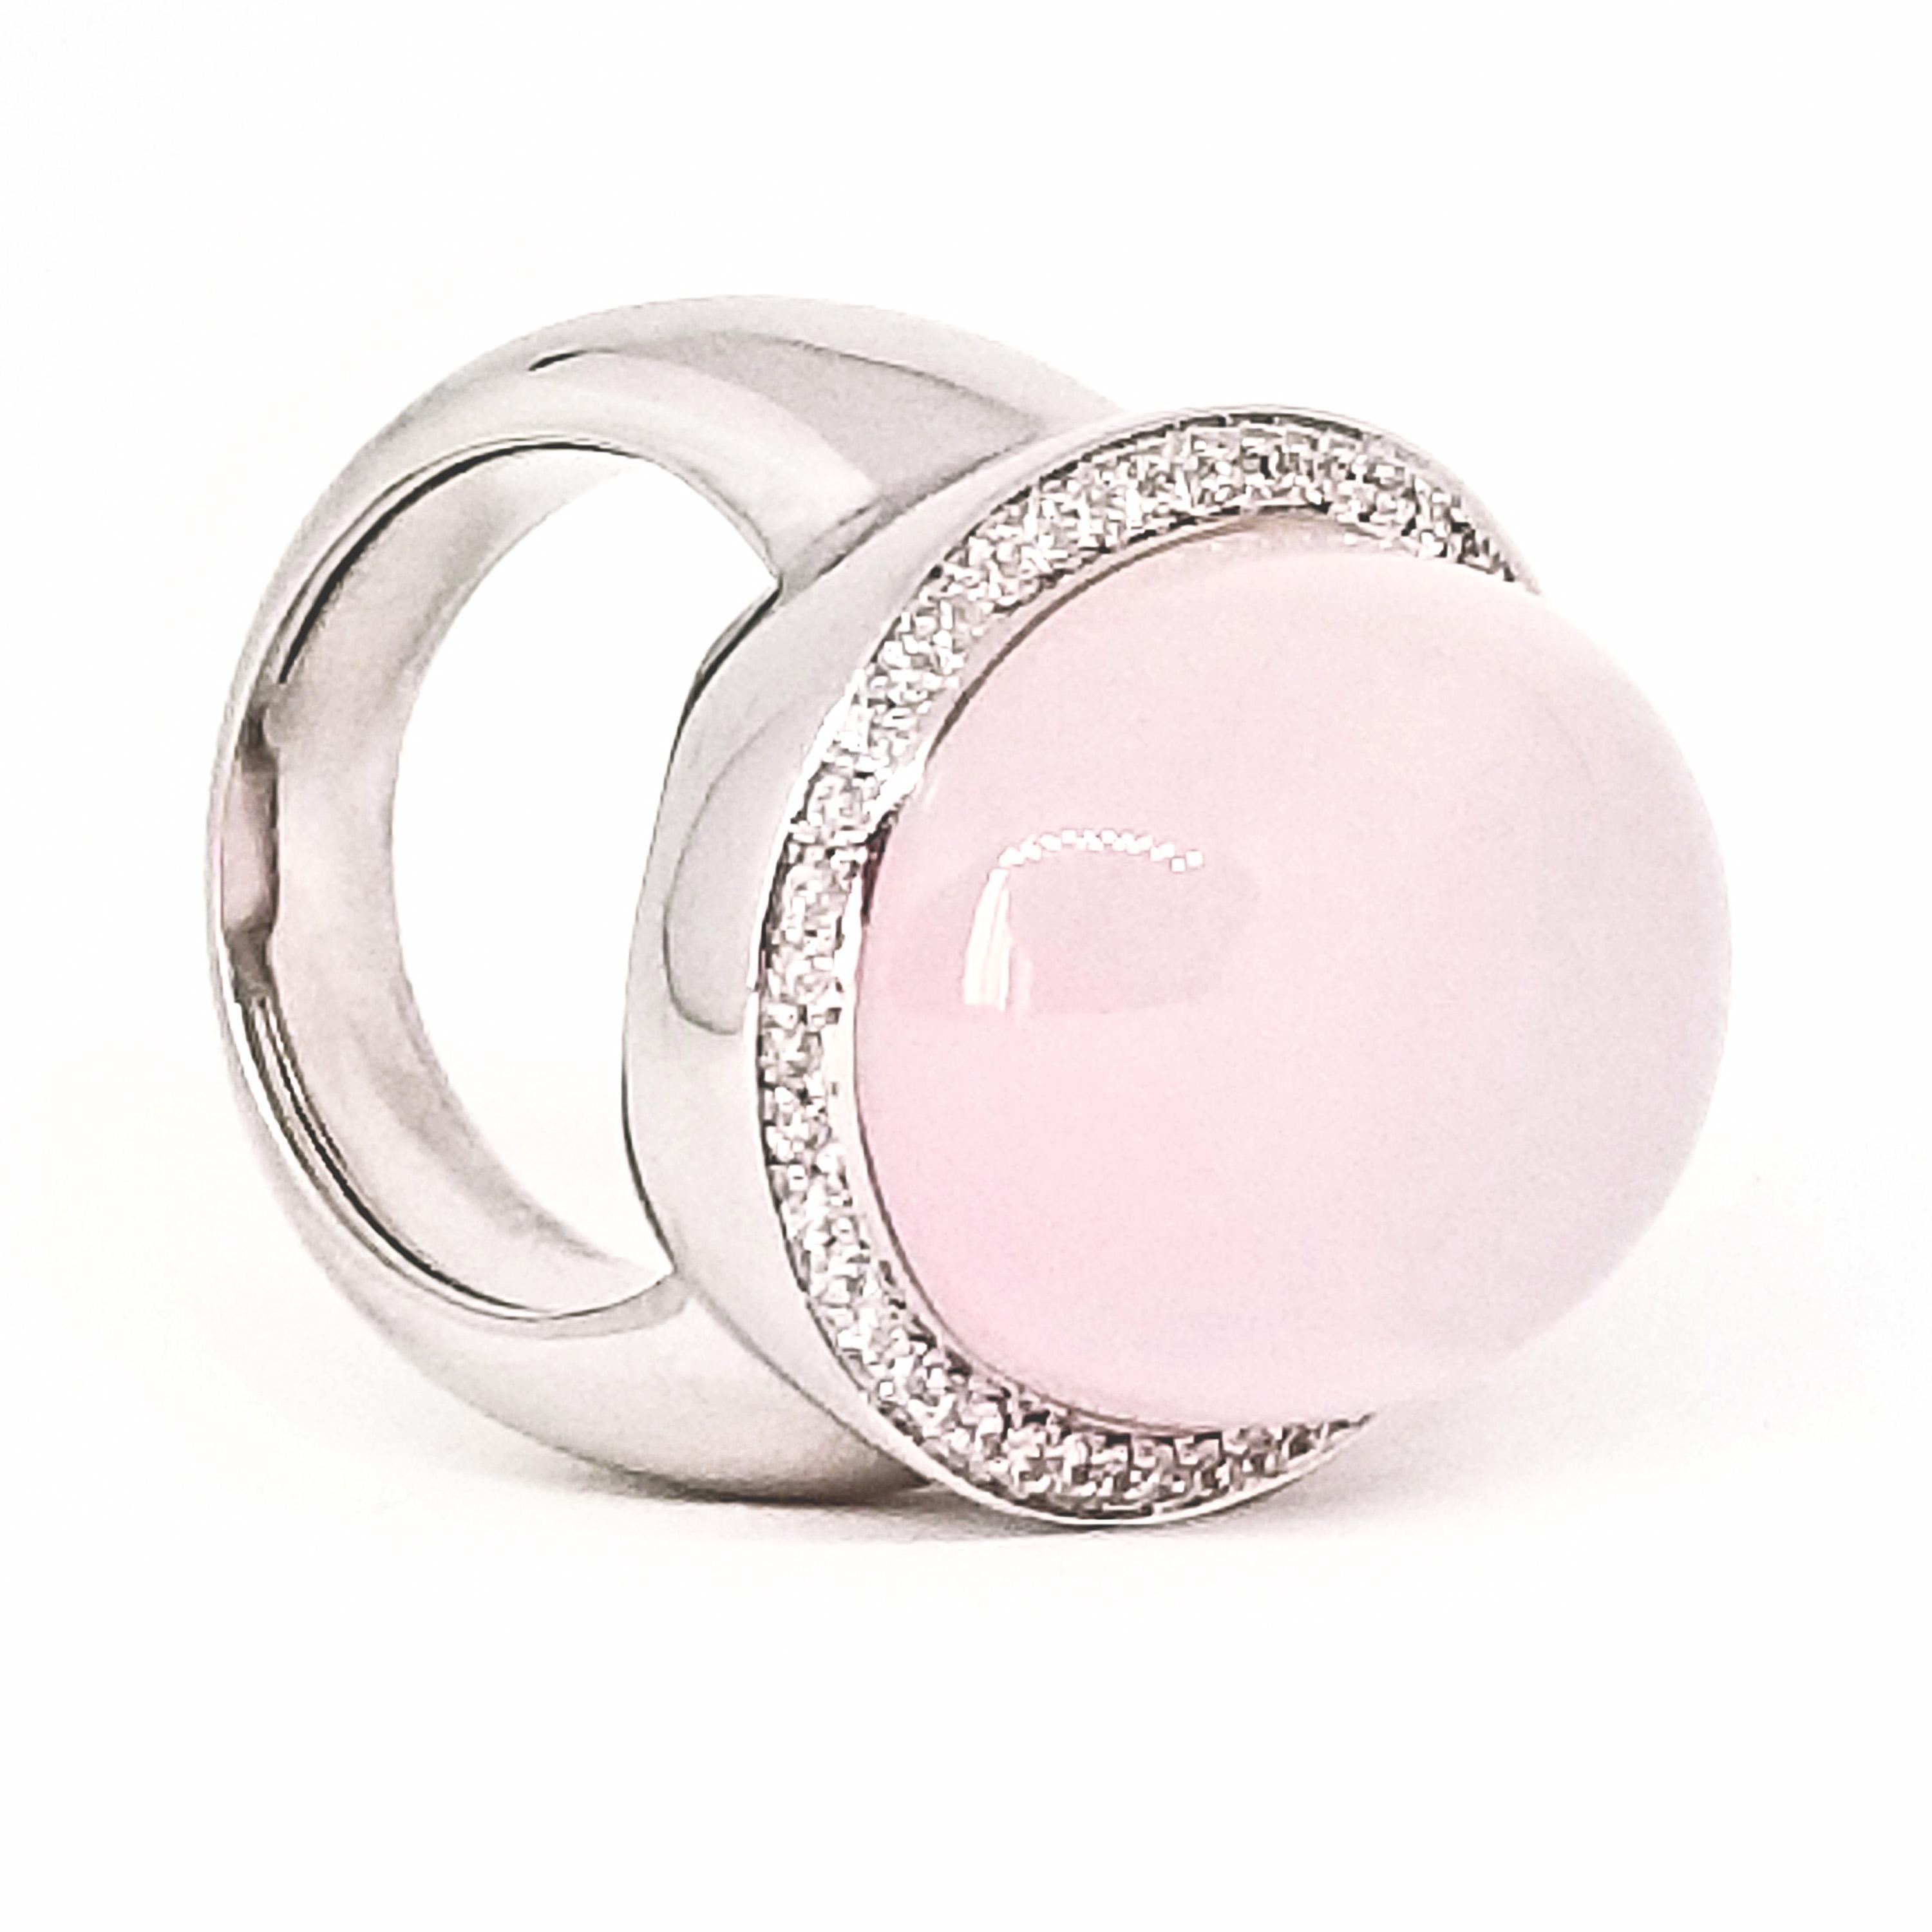 This Beautifully made, Contemporary Statement Ring features a 33.87 carat Rose Quartz Cabochon. The Oval Shaped, High Cabochon stone is a Semi Translucent Pink with the Glowing characteristics of a Moon Stone. The Stone is exceptionally clean and is